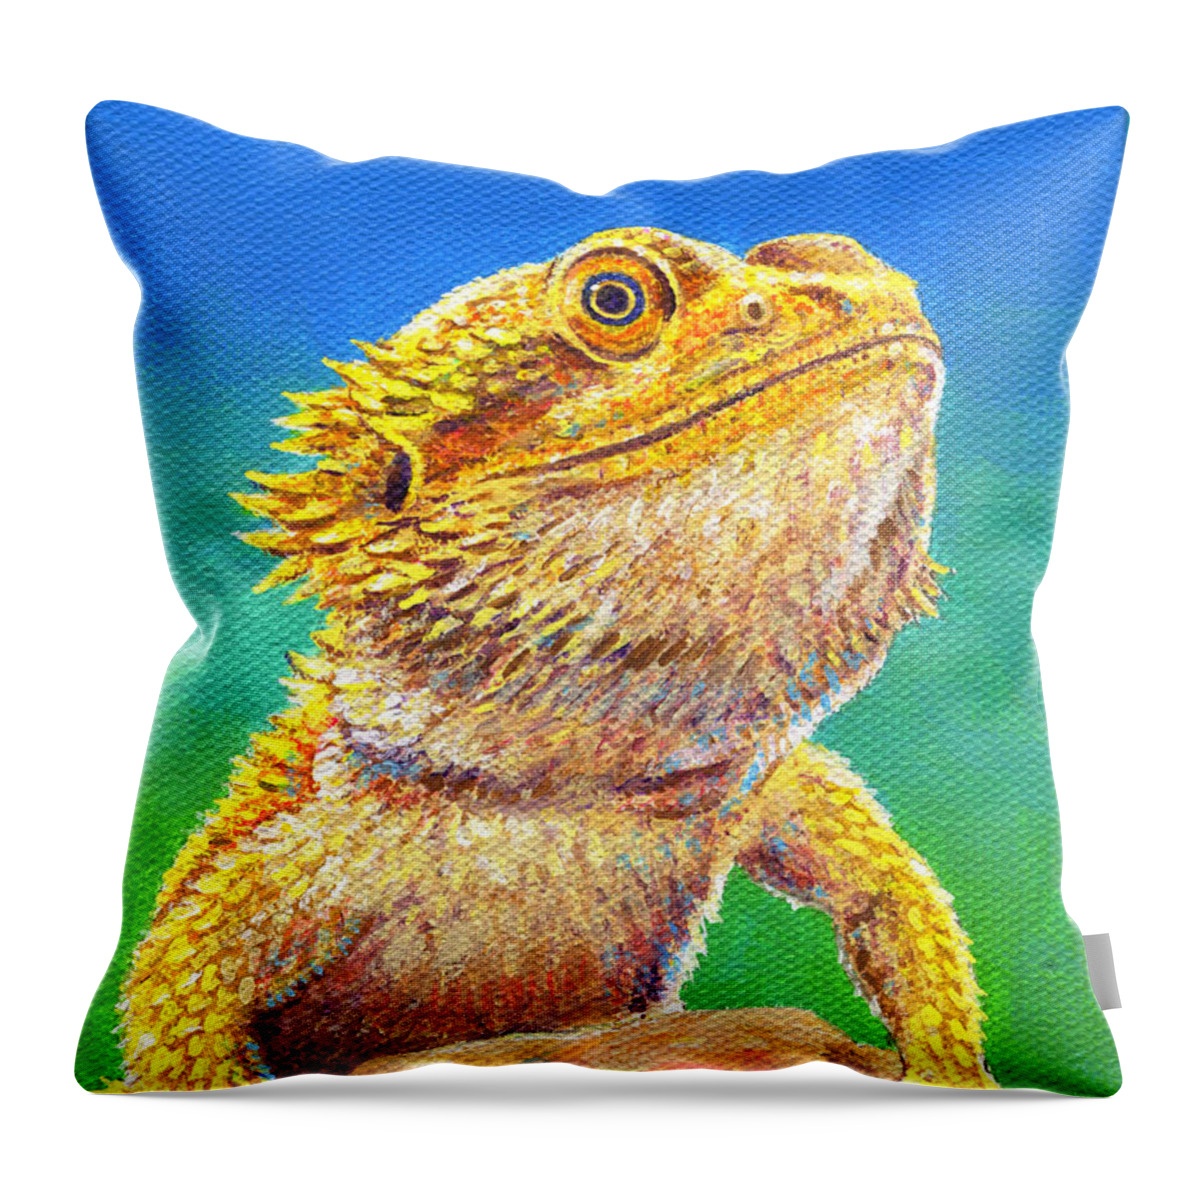 Bearded Dragon Throw Pillow featuring the painting Bearded Dragon Portrait by Rebecca Wang